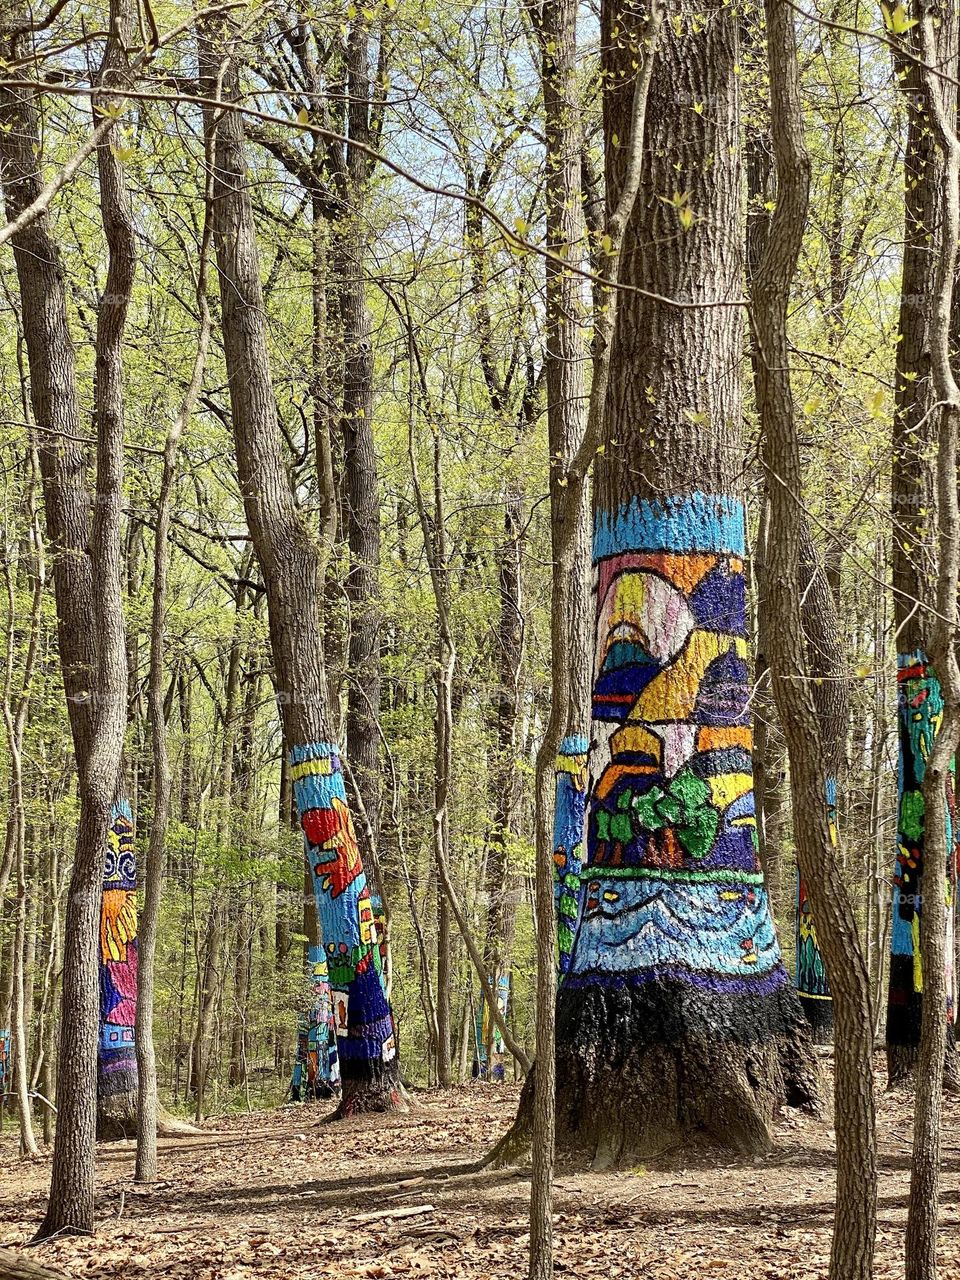 Painted tree trunks in a forest